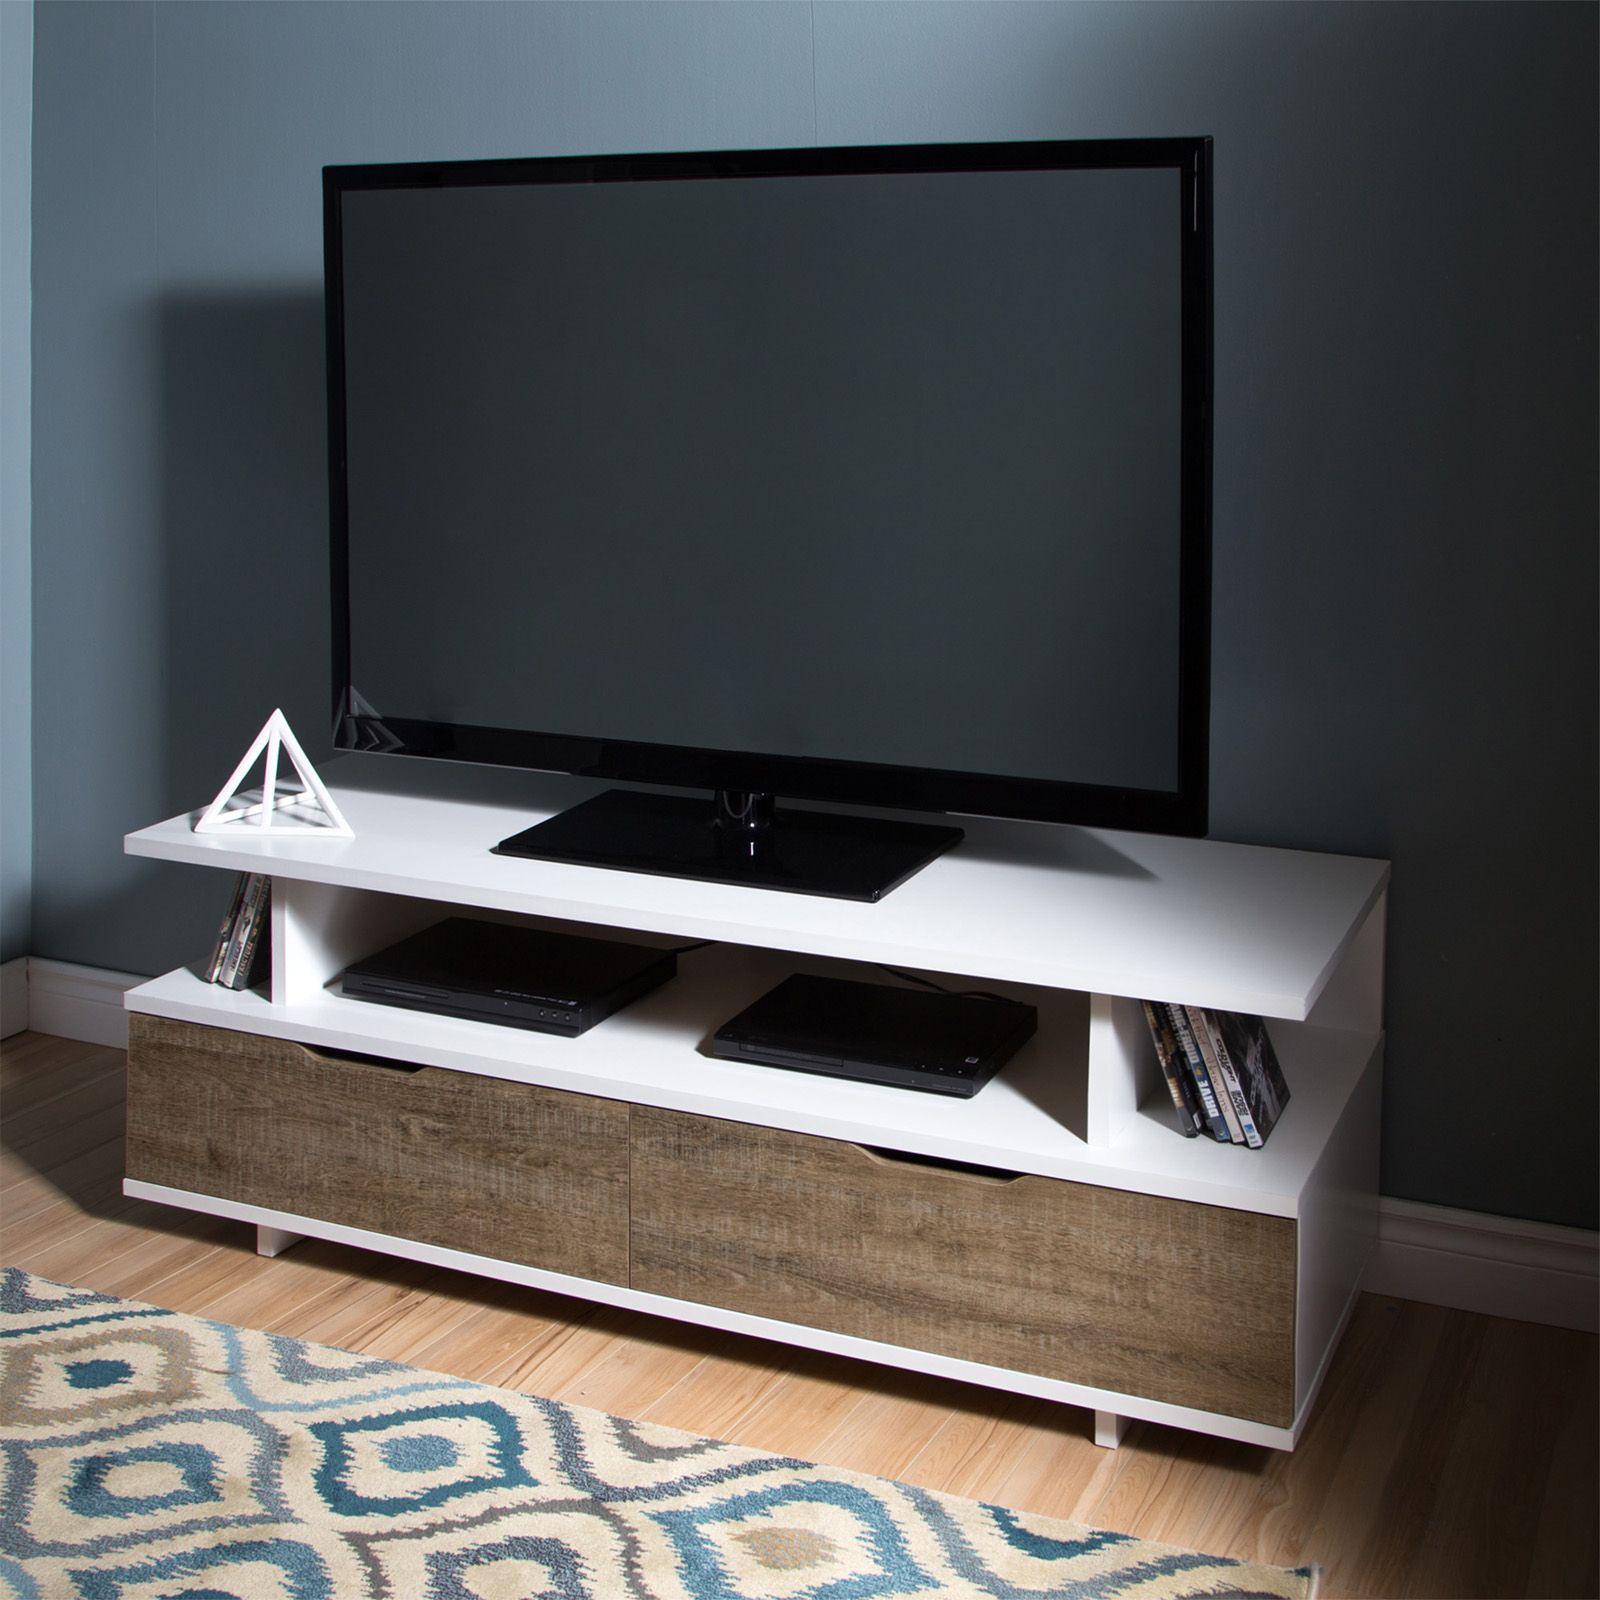 South Shore Reflekt Tv Stand – Tv Stands At Hayneedle Regarding Modern Low Tv Stands (View 4 of 15)